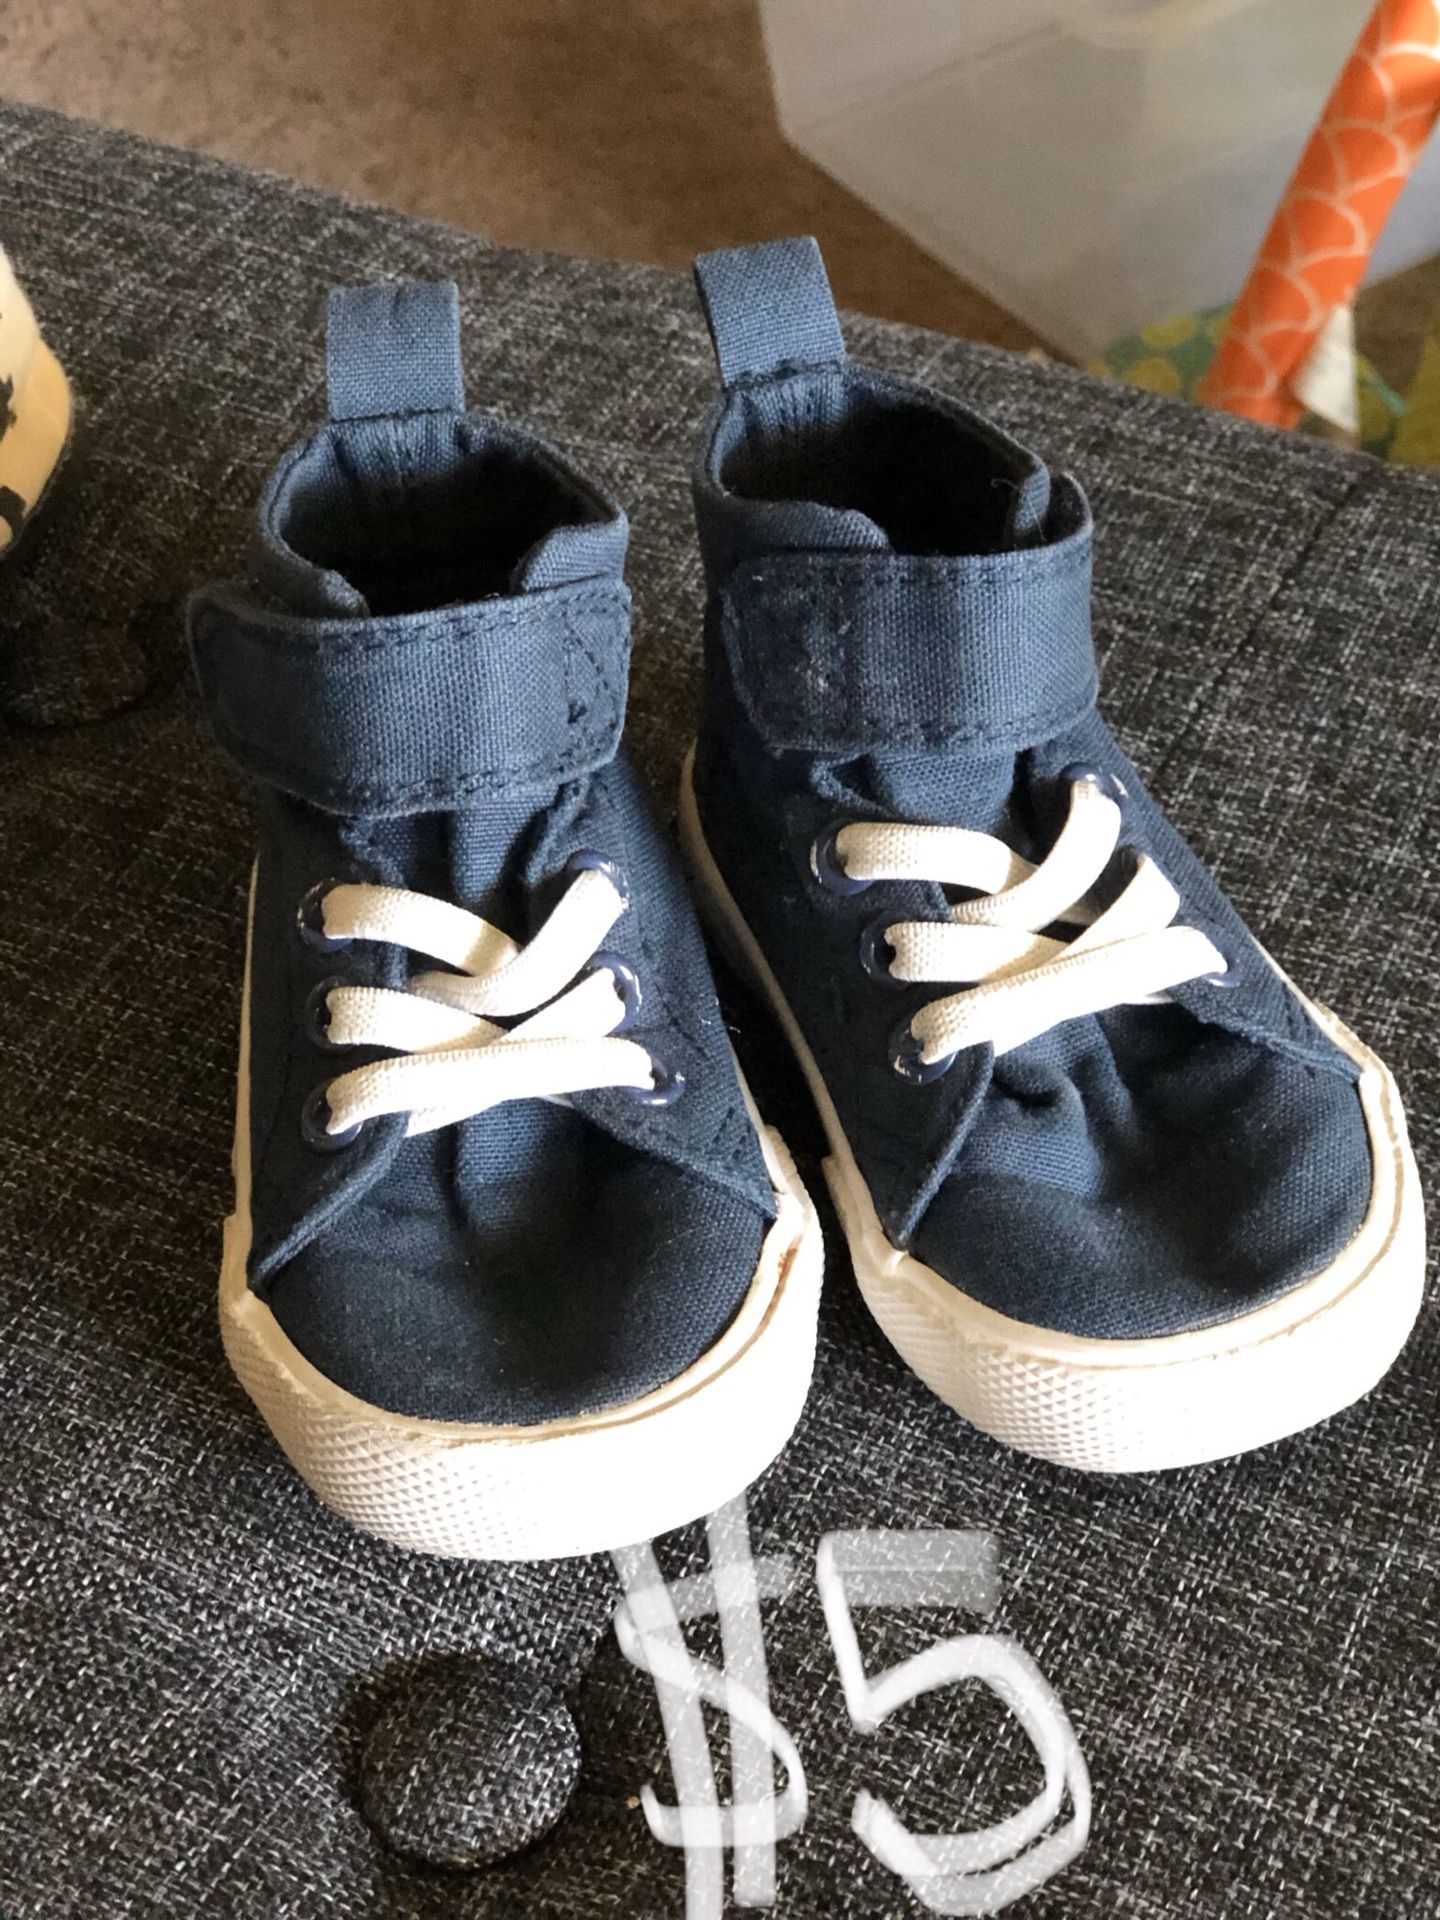 Baby toddler shoes size 4